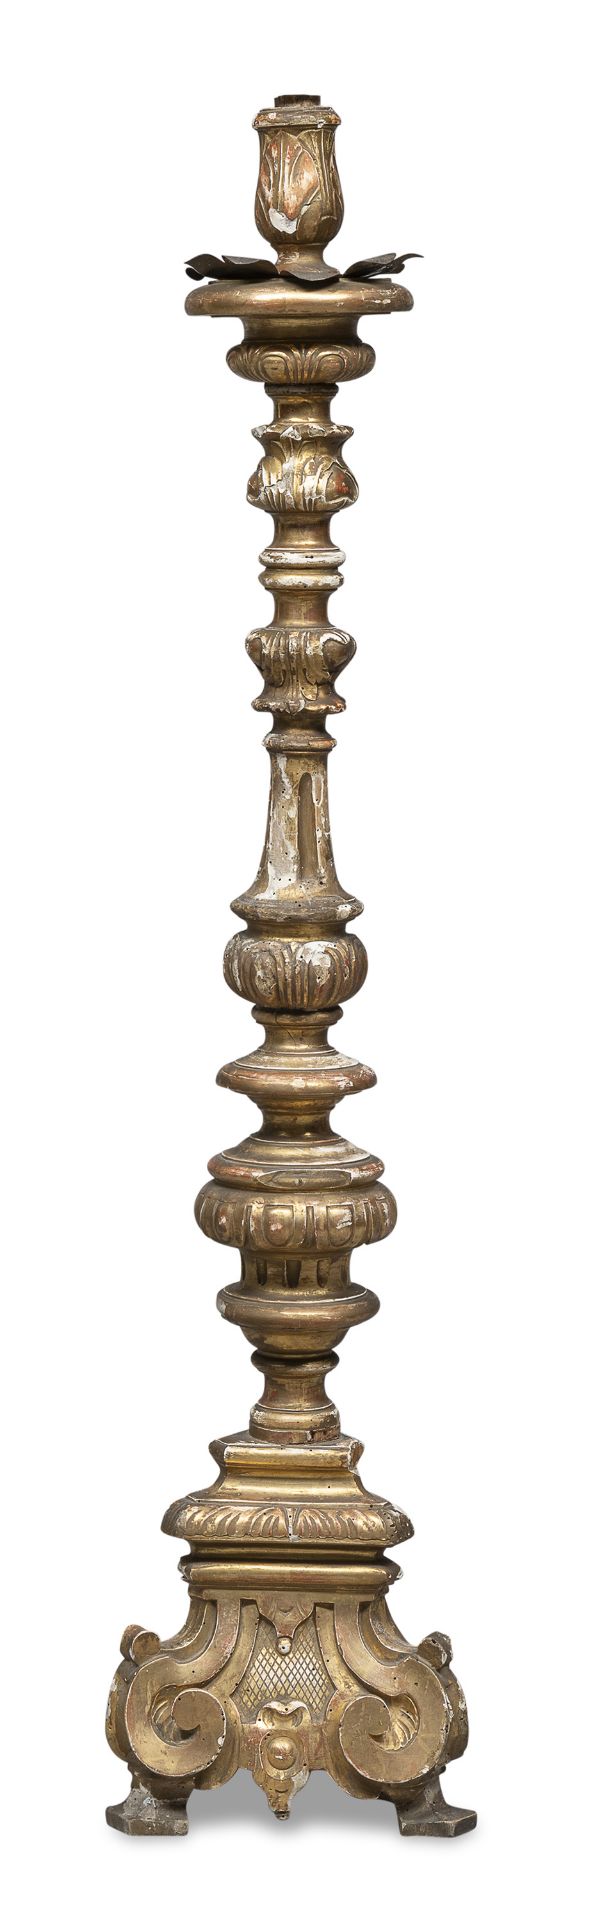 FLOOR CANDLESTICK IN GILTWOOD PROBABLY VENICE 18TH CENTURY